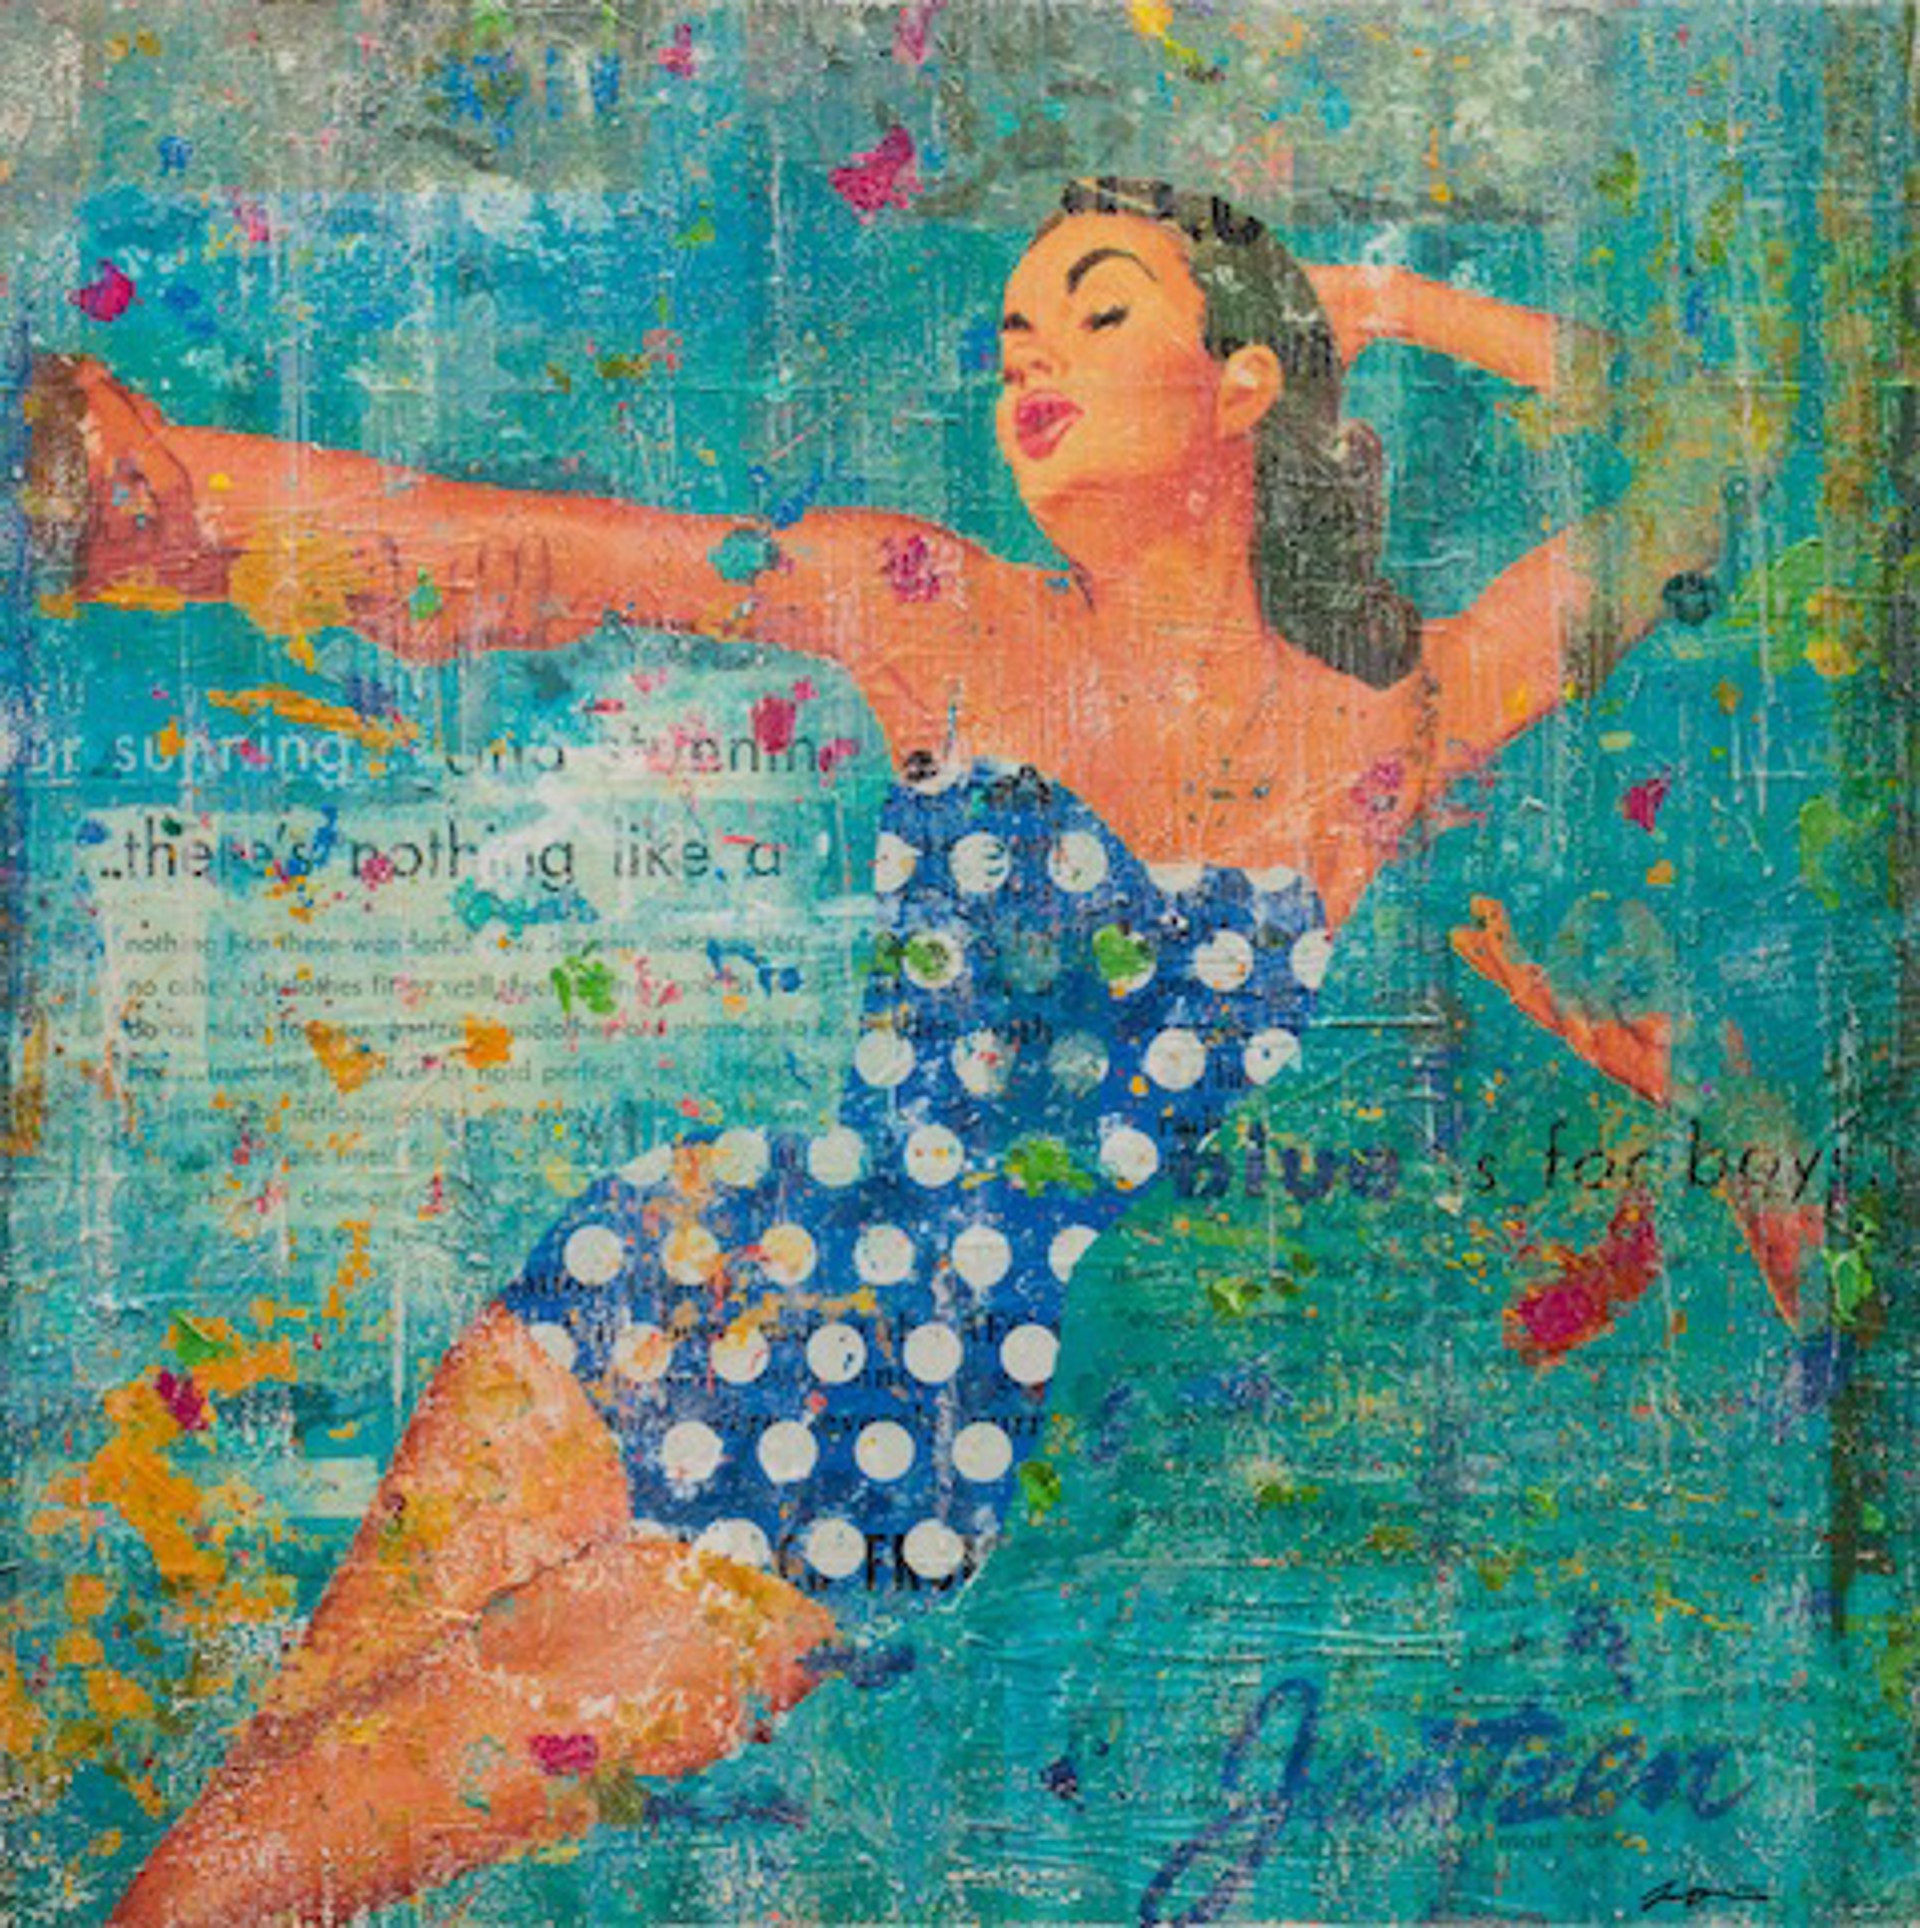 Blue Swimsuit With Polka Dots by Jon Davenport